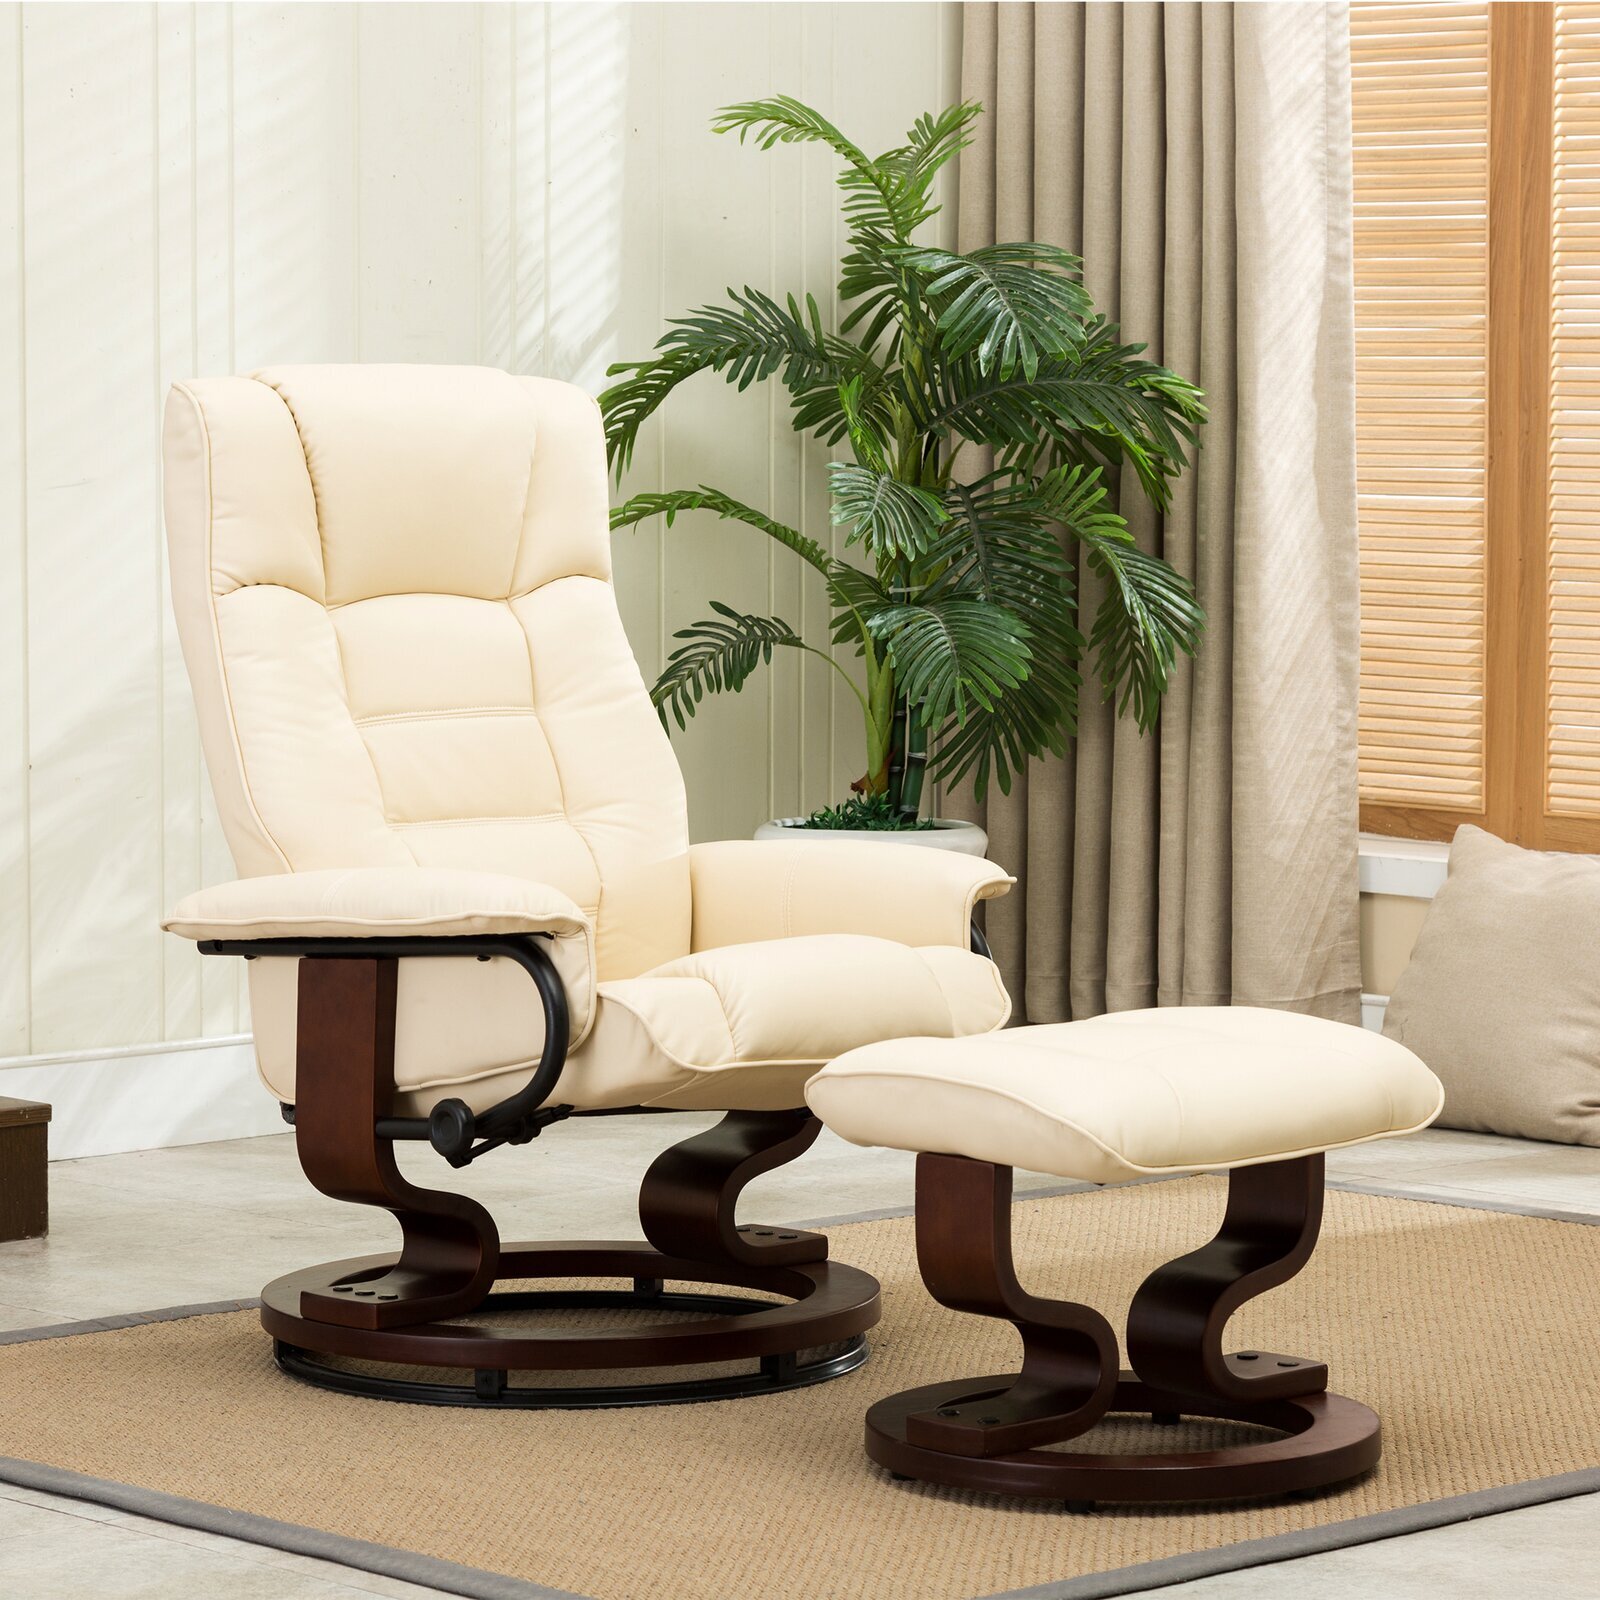 Swedish Chair and Ottoman with Wooden Accents